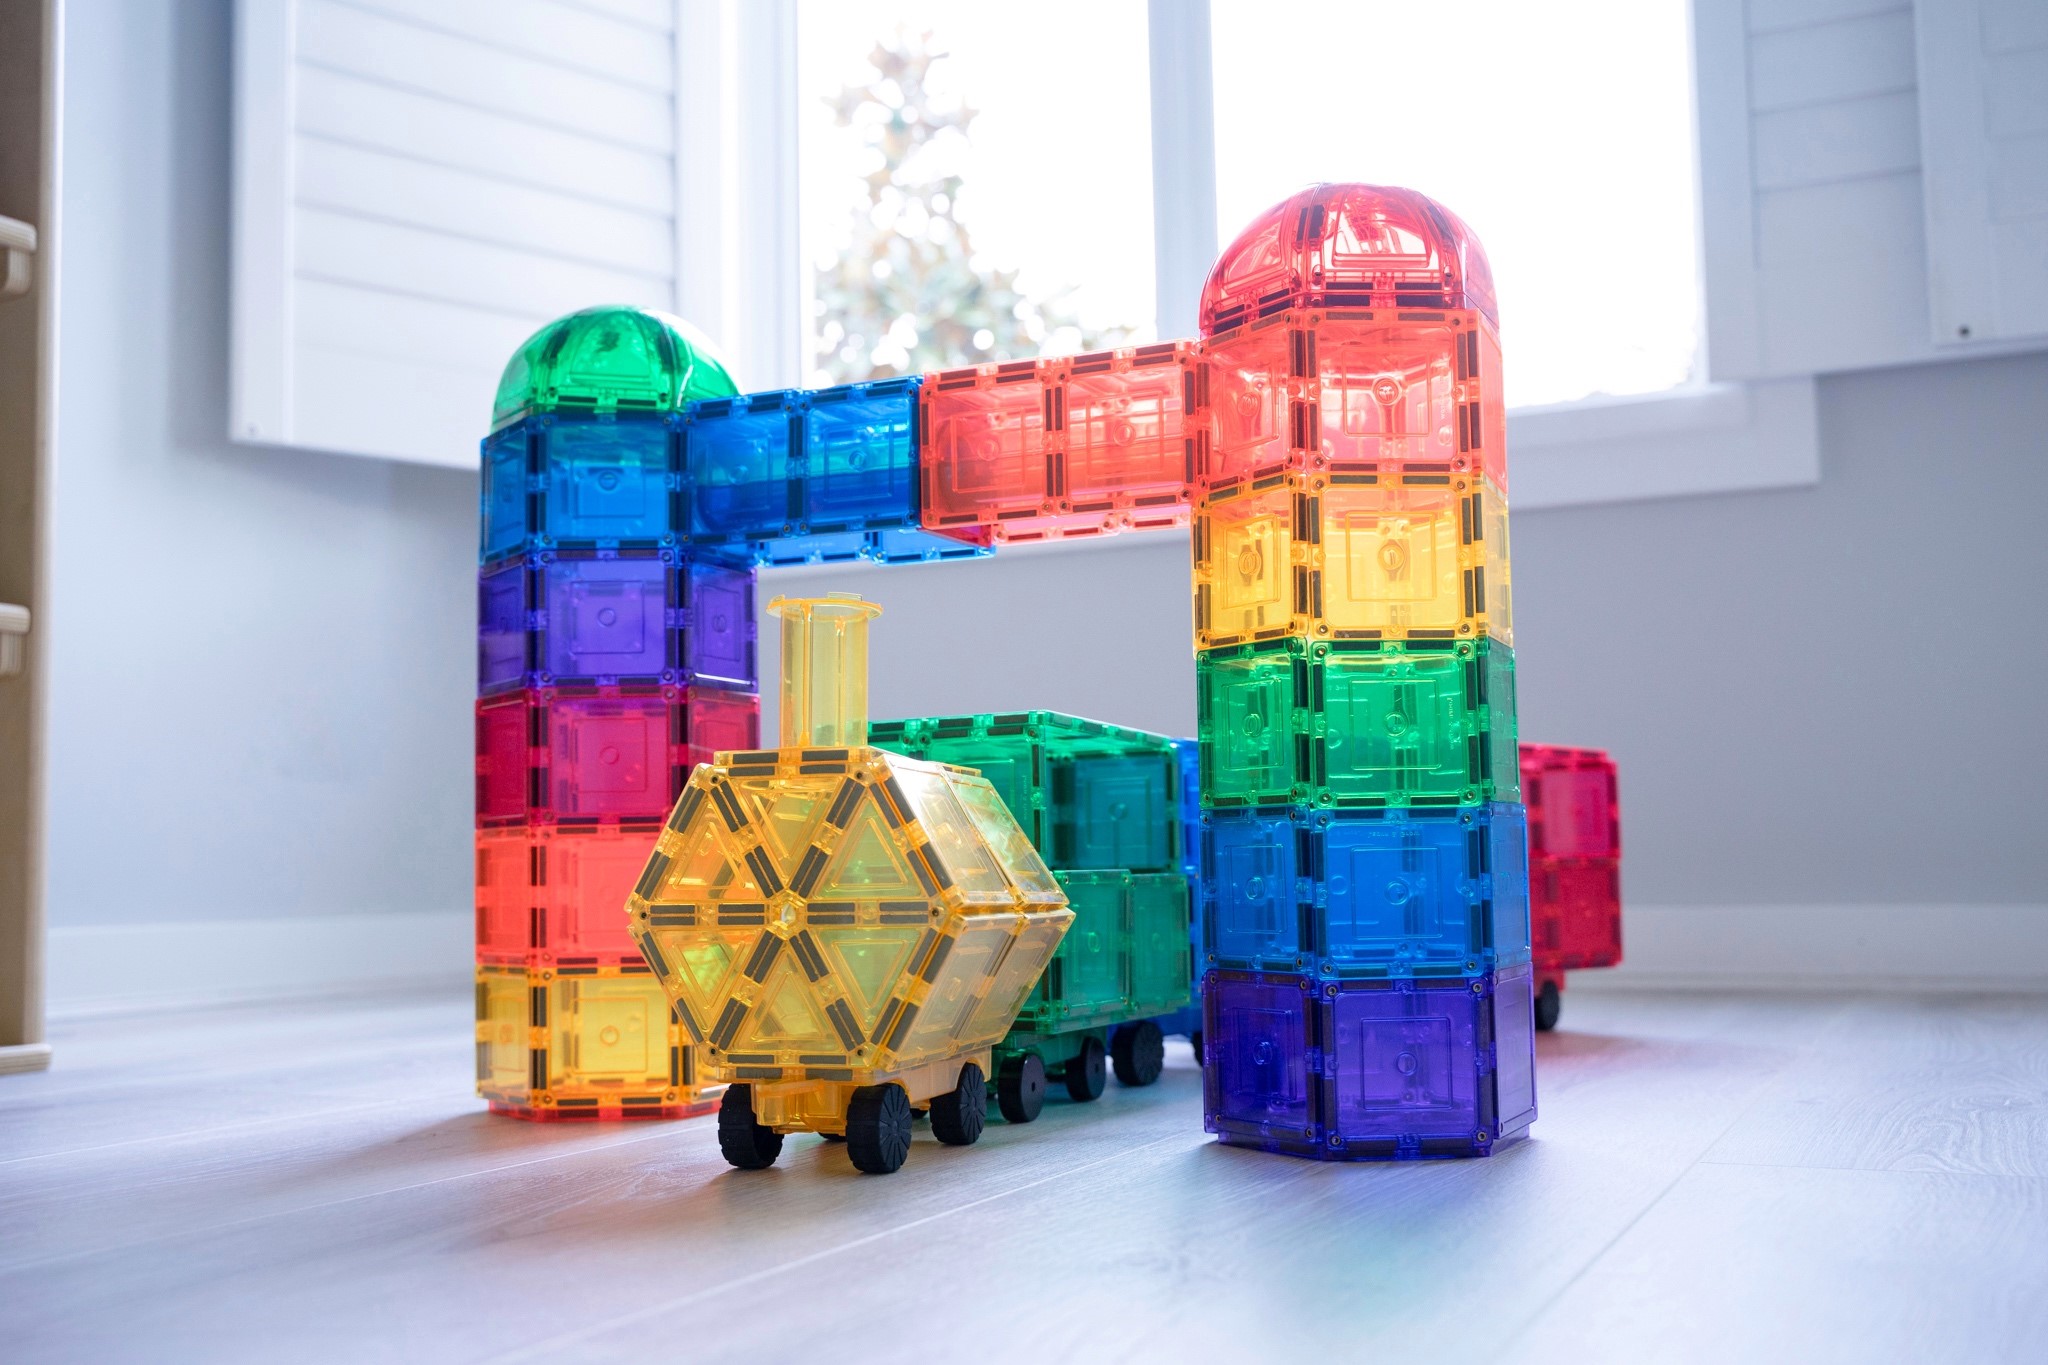 Learn and Grow magnetic tile train and dome build in playroom with sunlight coming through the window